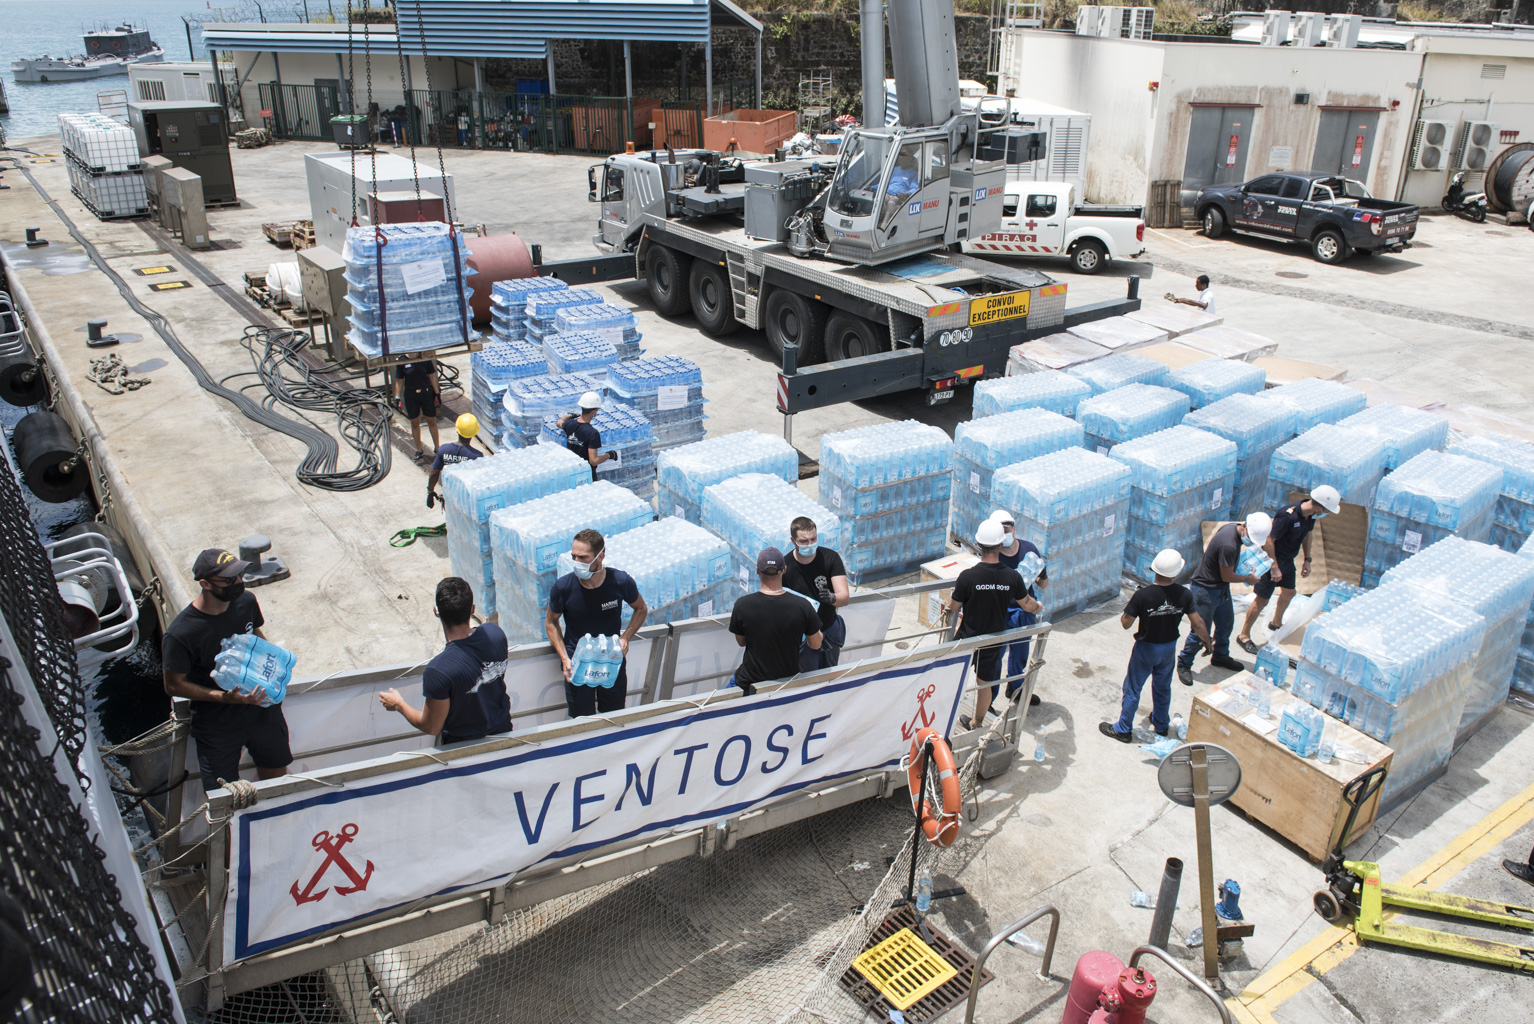 100 tonnes of water loaded onto the Army Frigate to help the people of St Vincent affected by the eruption of its volcano La Soufrière.